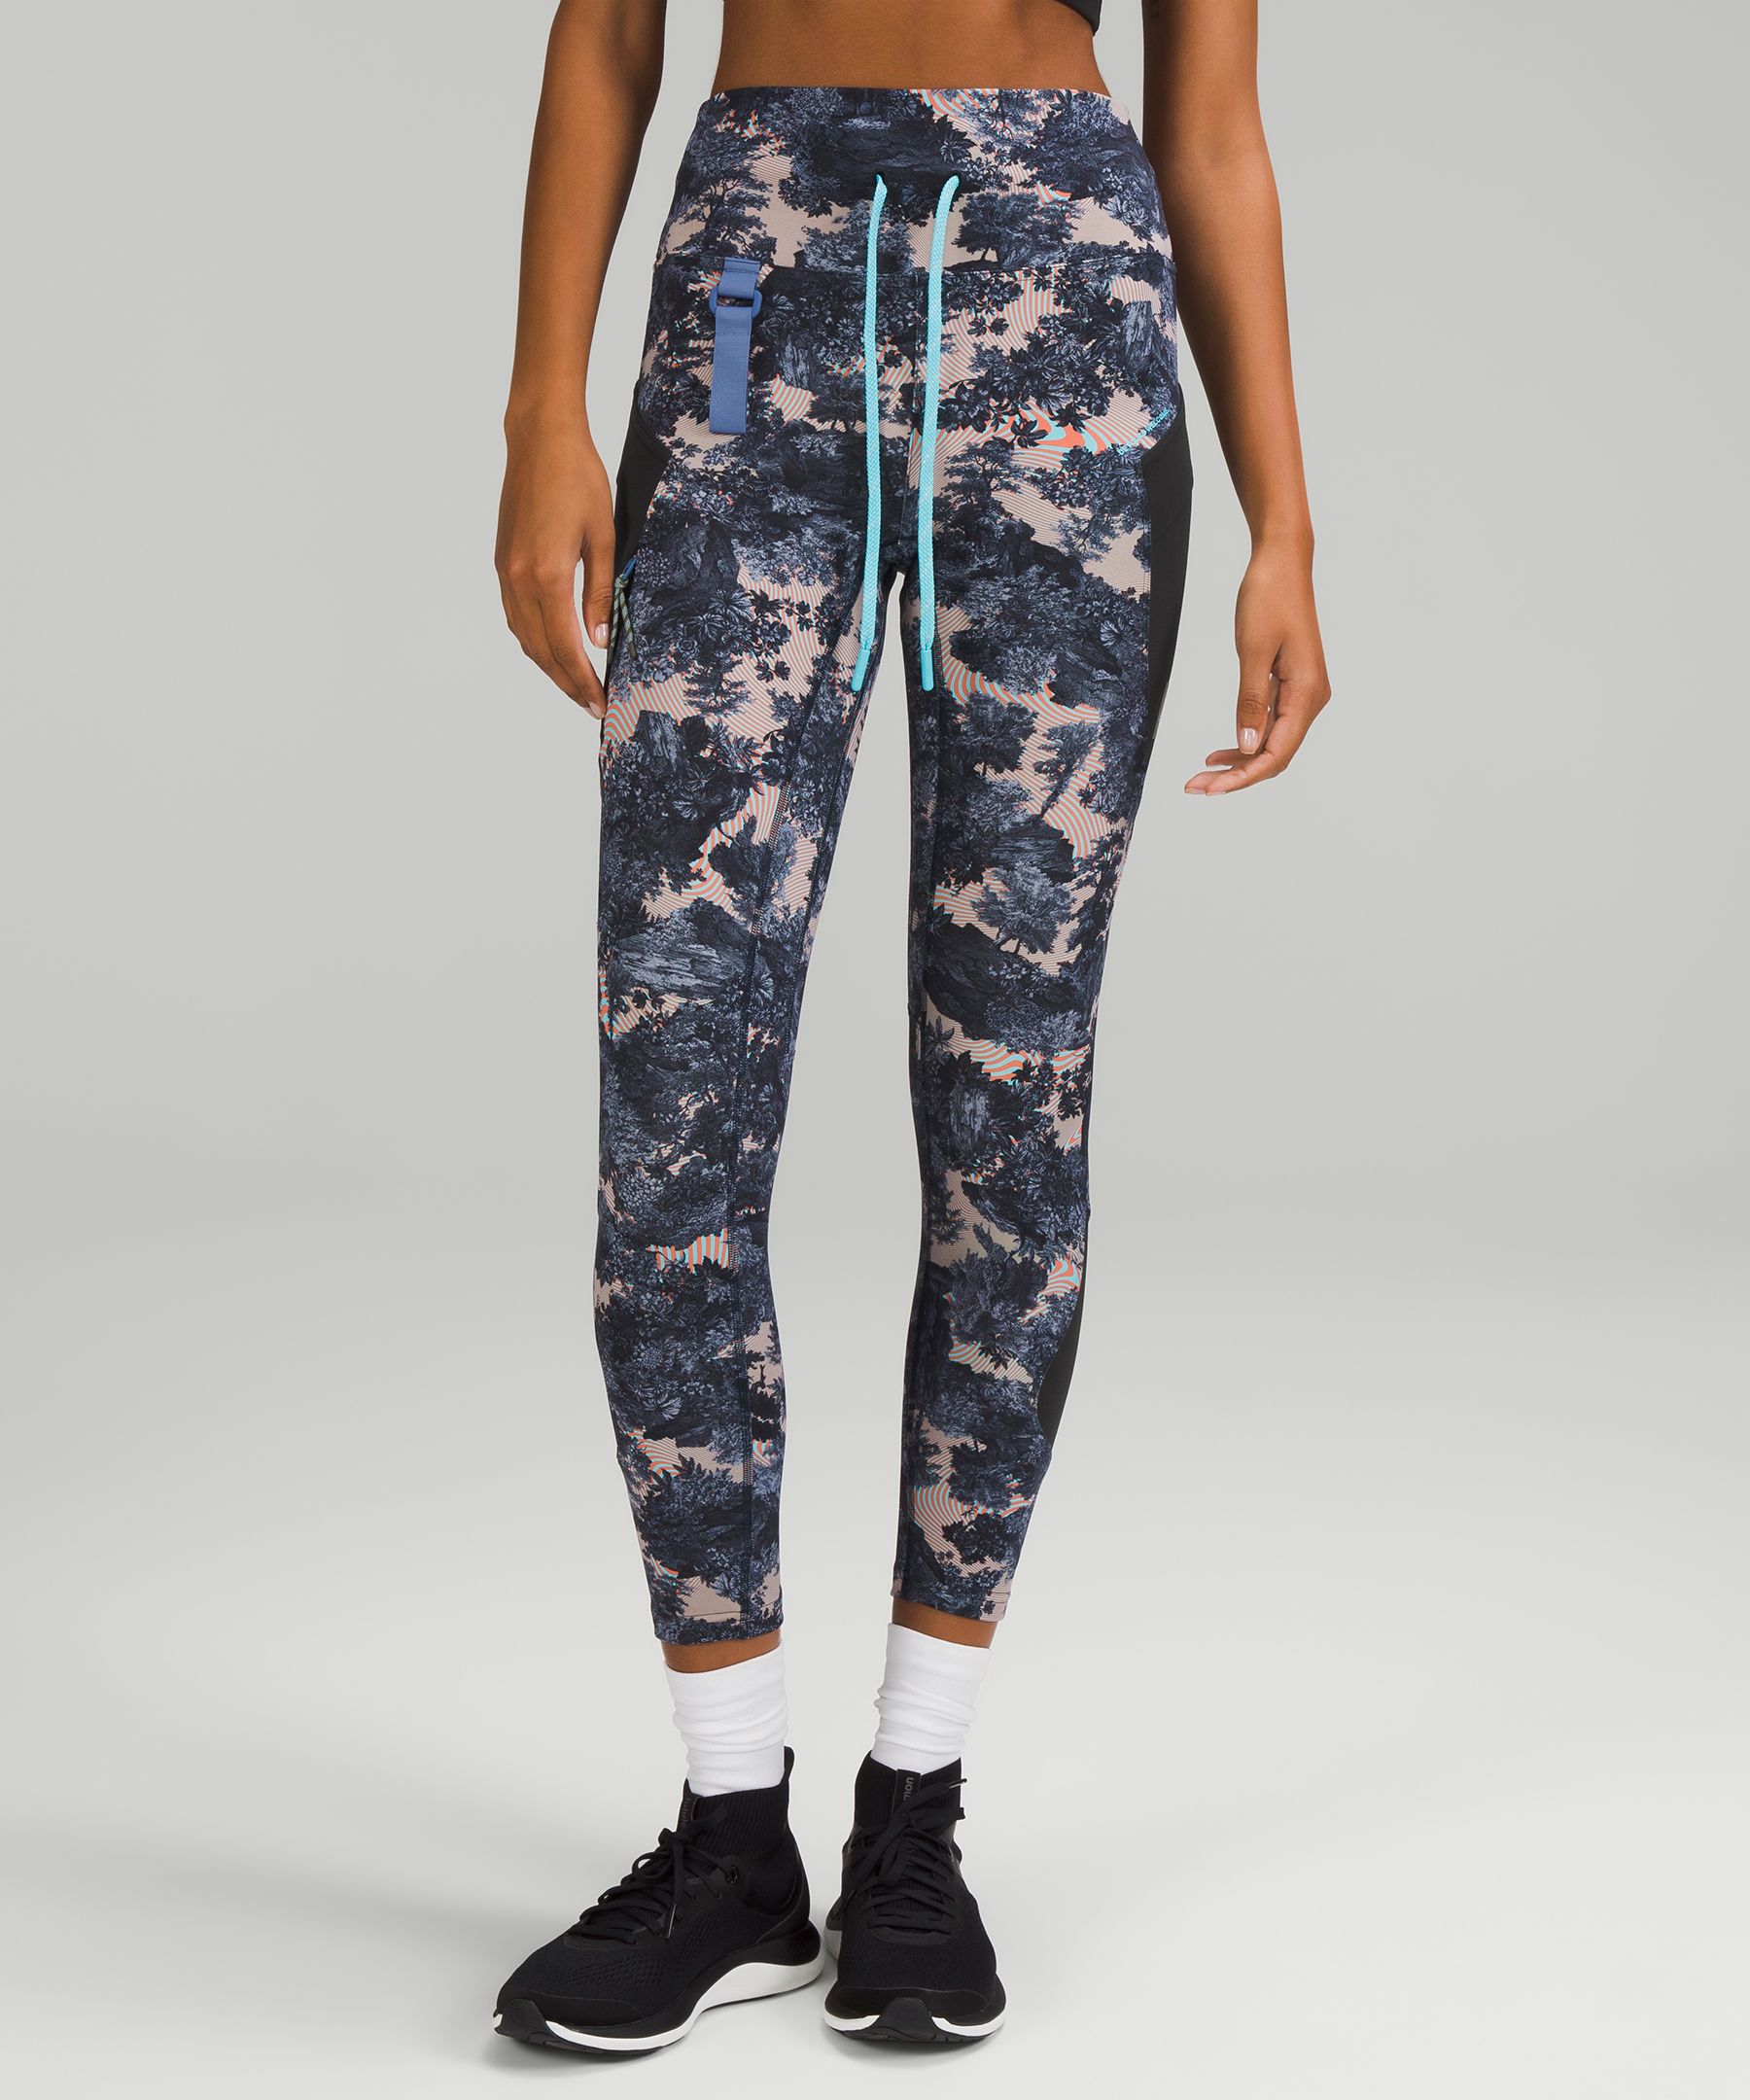 Anyone have the Incognito Camo leggings that can share review/pics